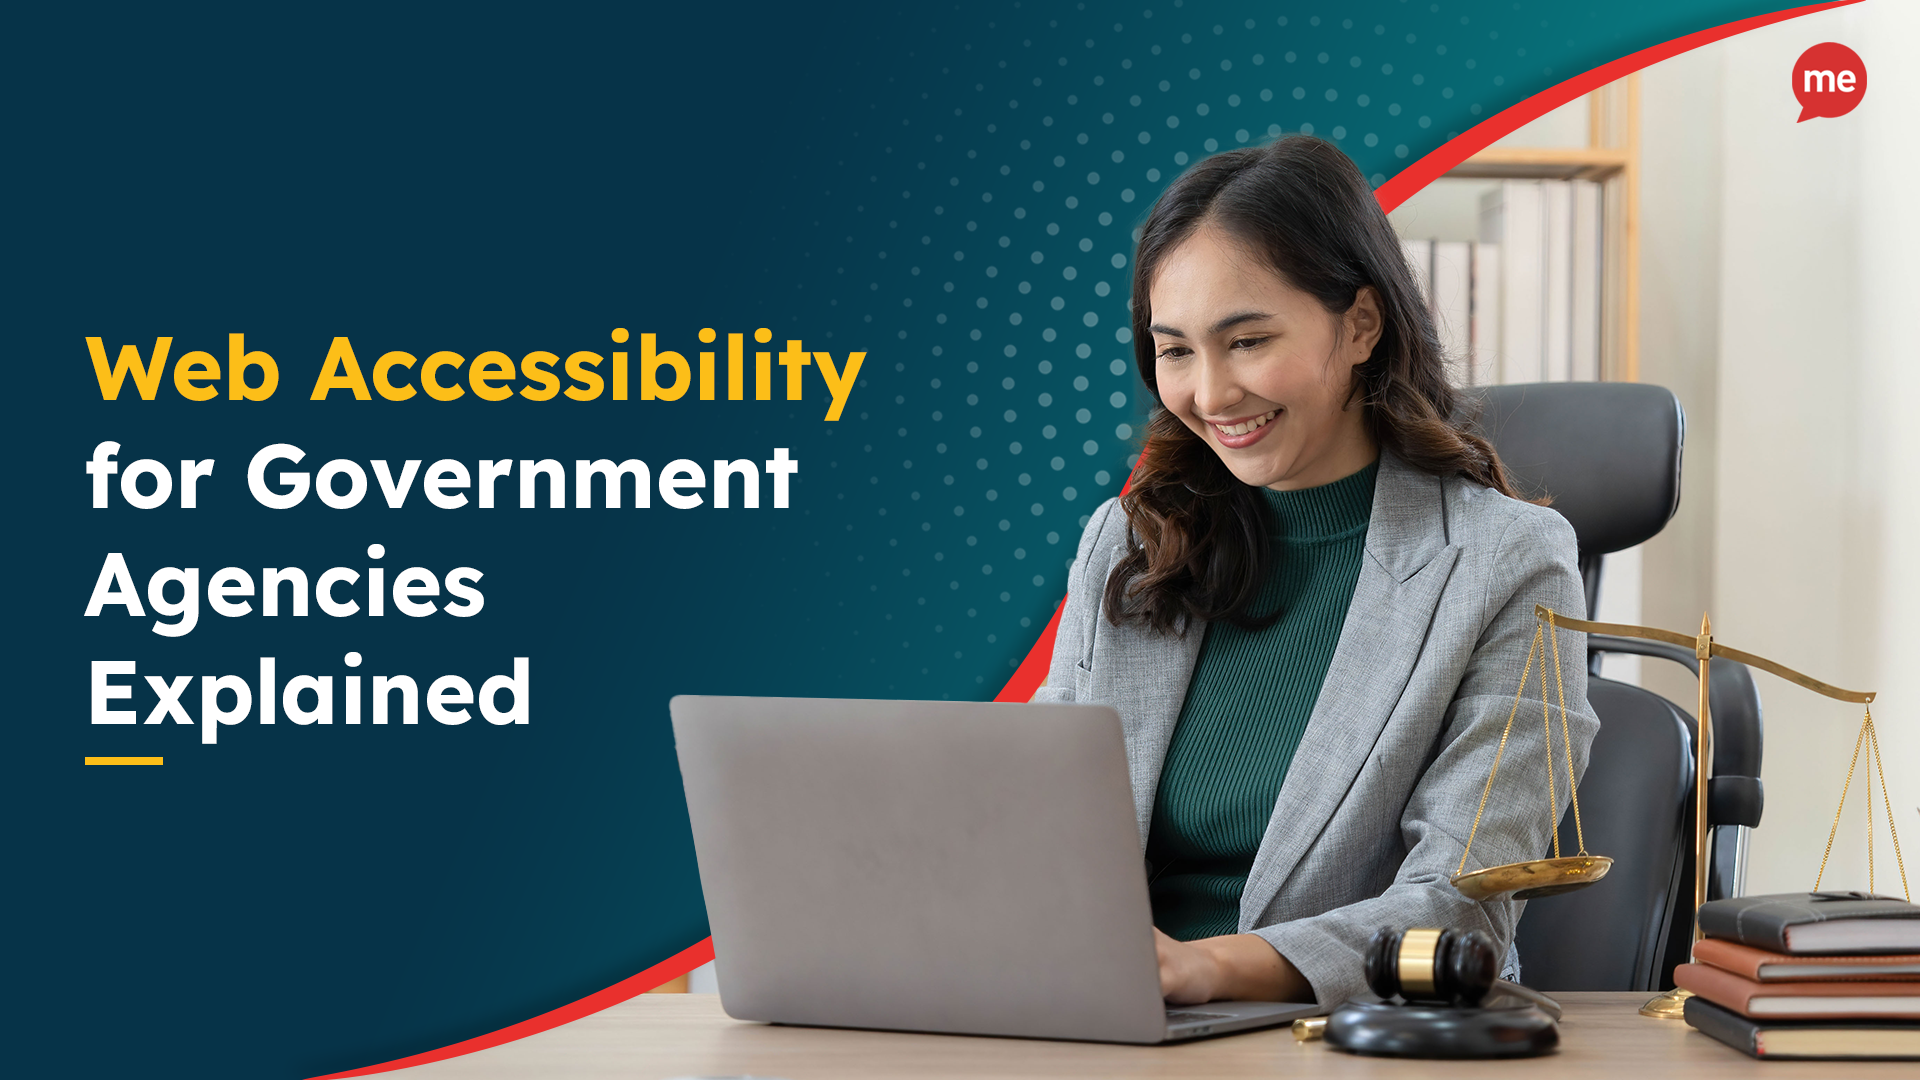 Web Accessibility for Government Agencies Explained